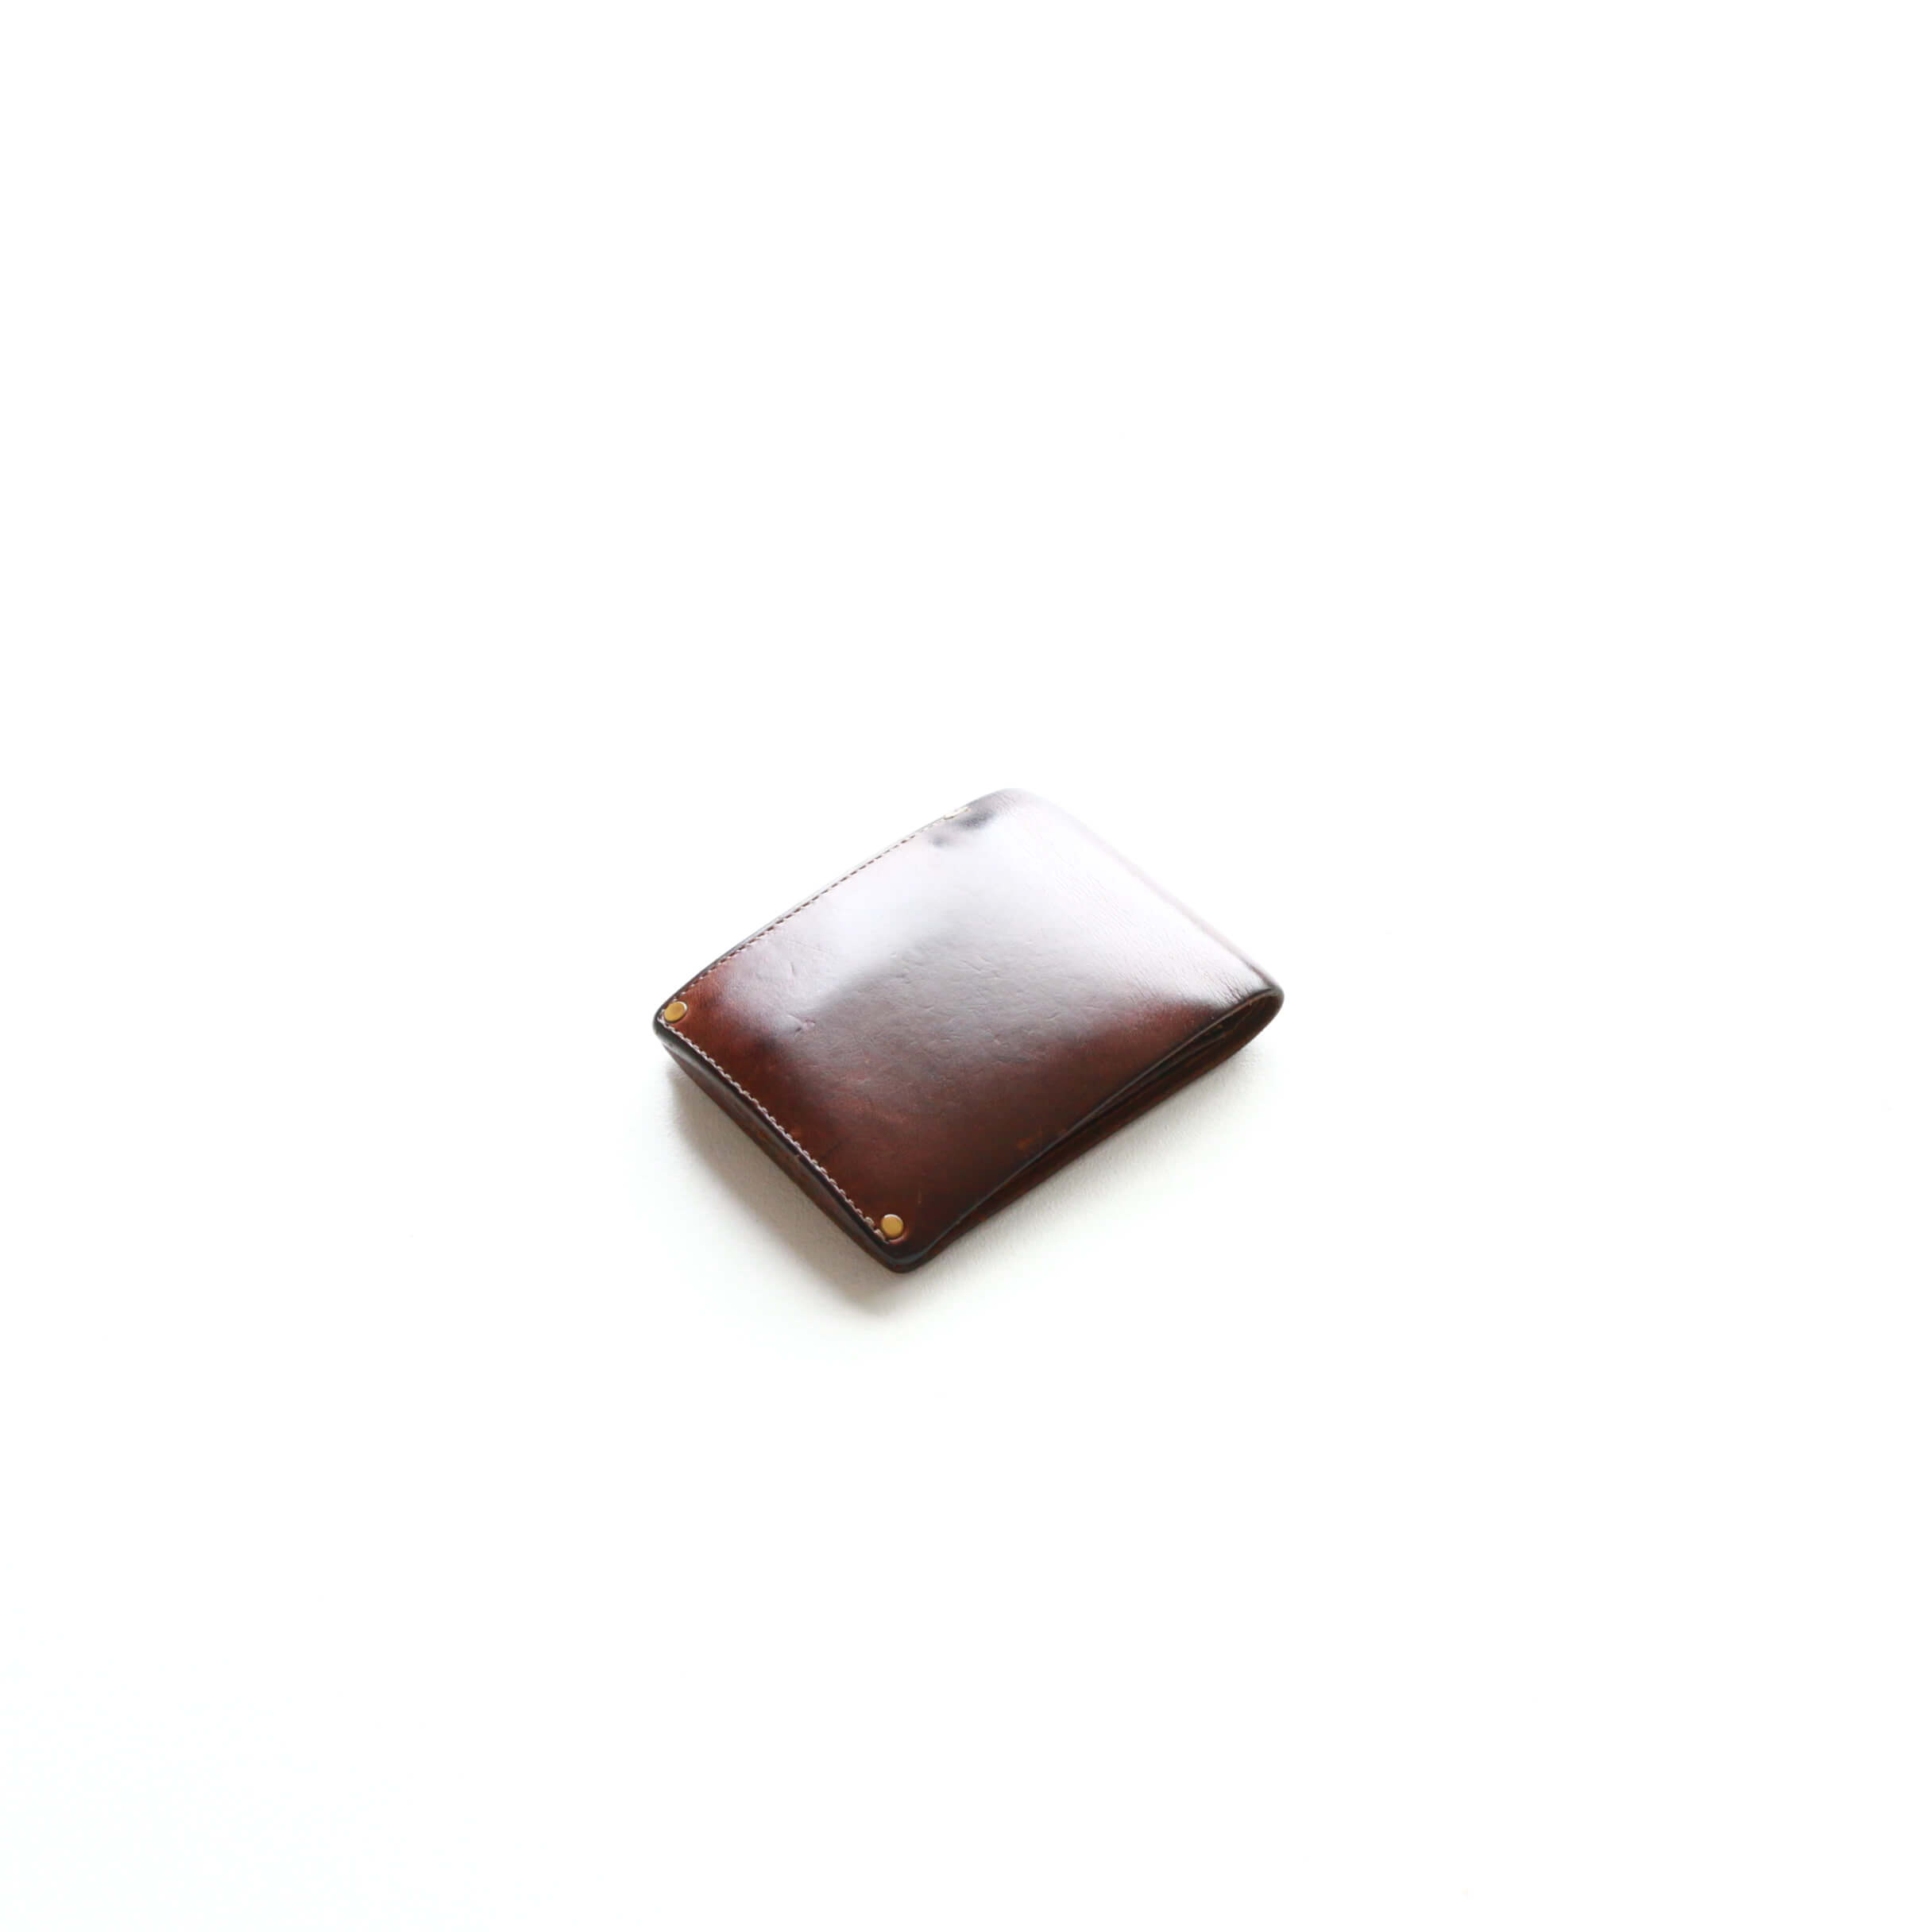 Vintage Works ヴィンテージワークス Leather Wallet クロムエクセルウォレット OIL.NAT